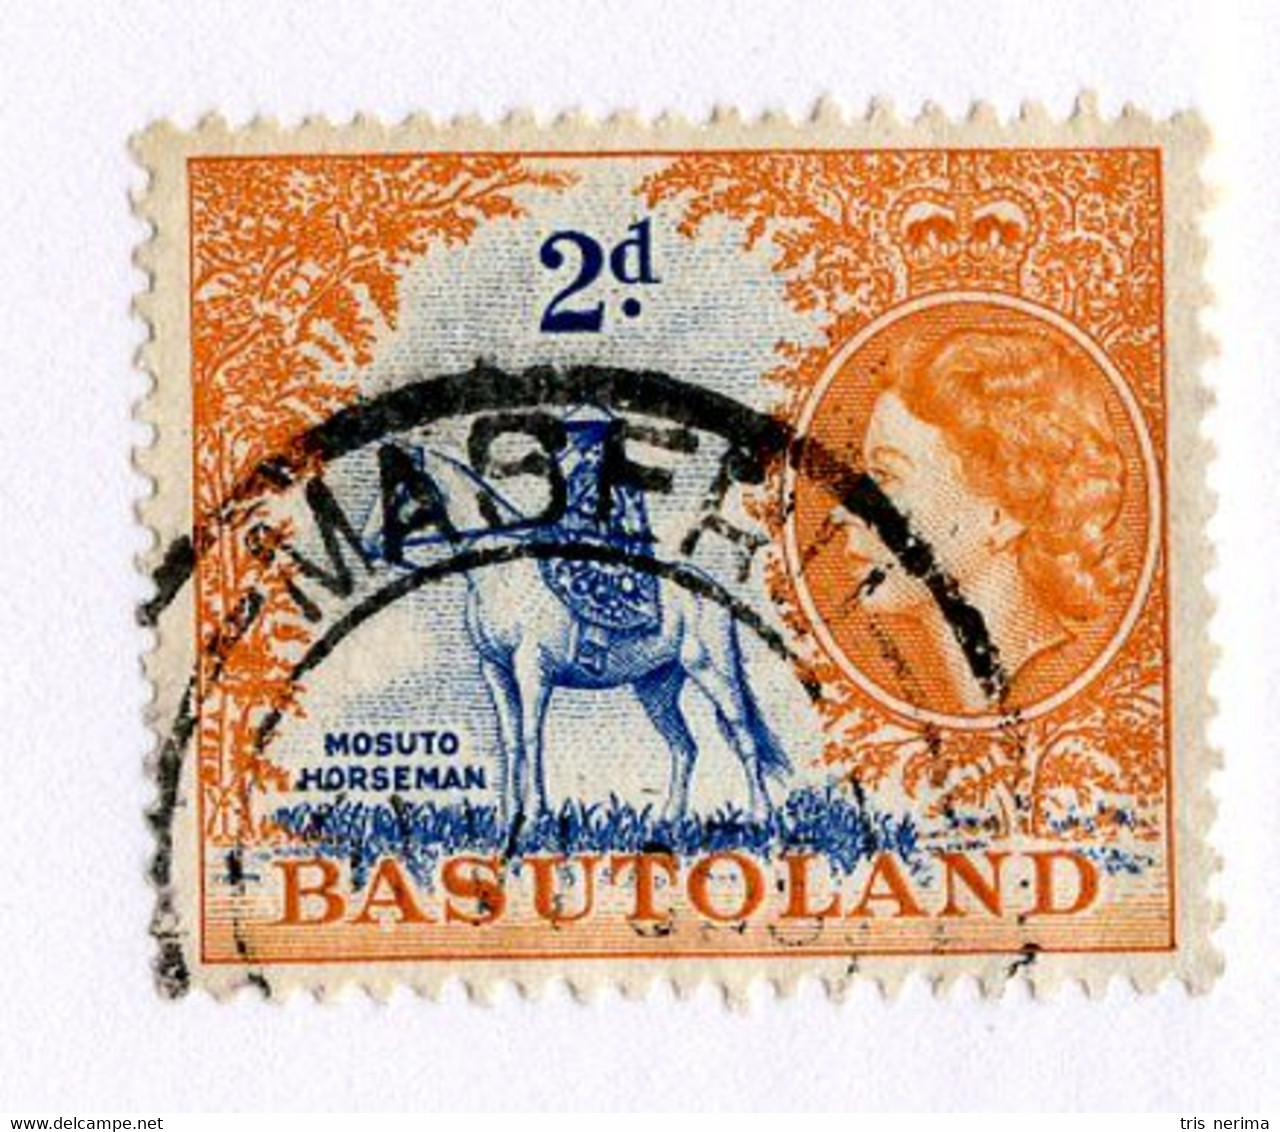 9820 BC Basutoland 1954 Scott# 48 Used [Offers Welcome] - 1965-1966 Self Government